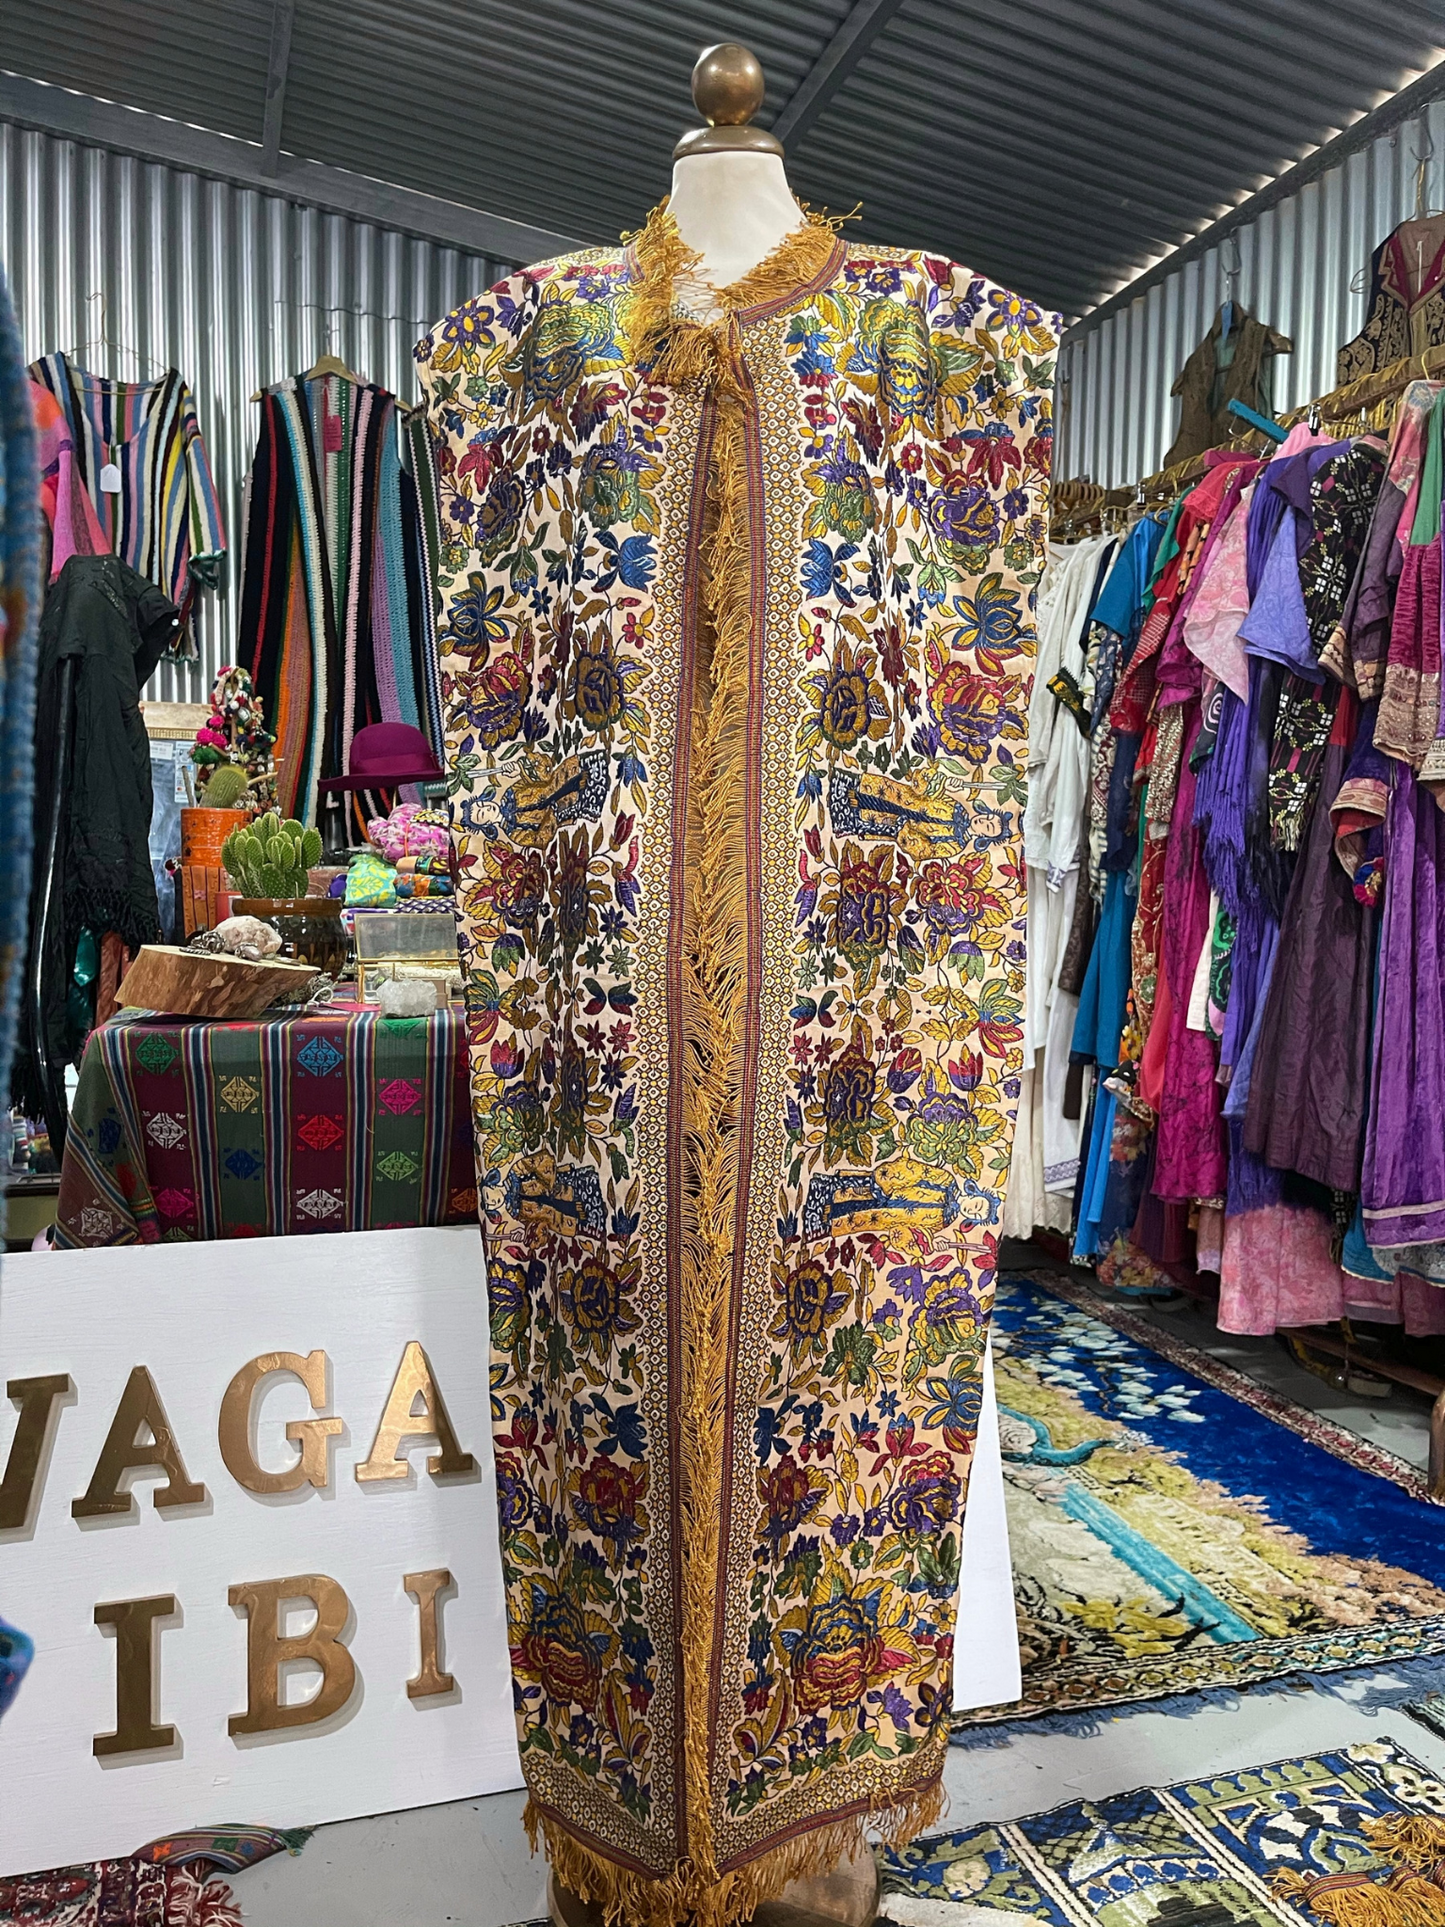 Amazing vintage 1970’s gold and rainbow woven textiles up-cycled by Vagabond Ibiza